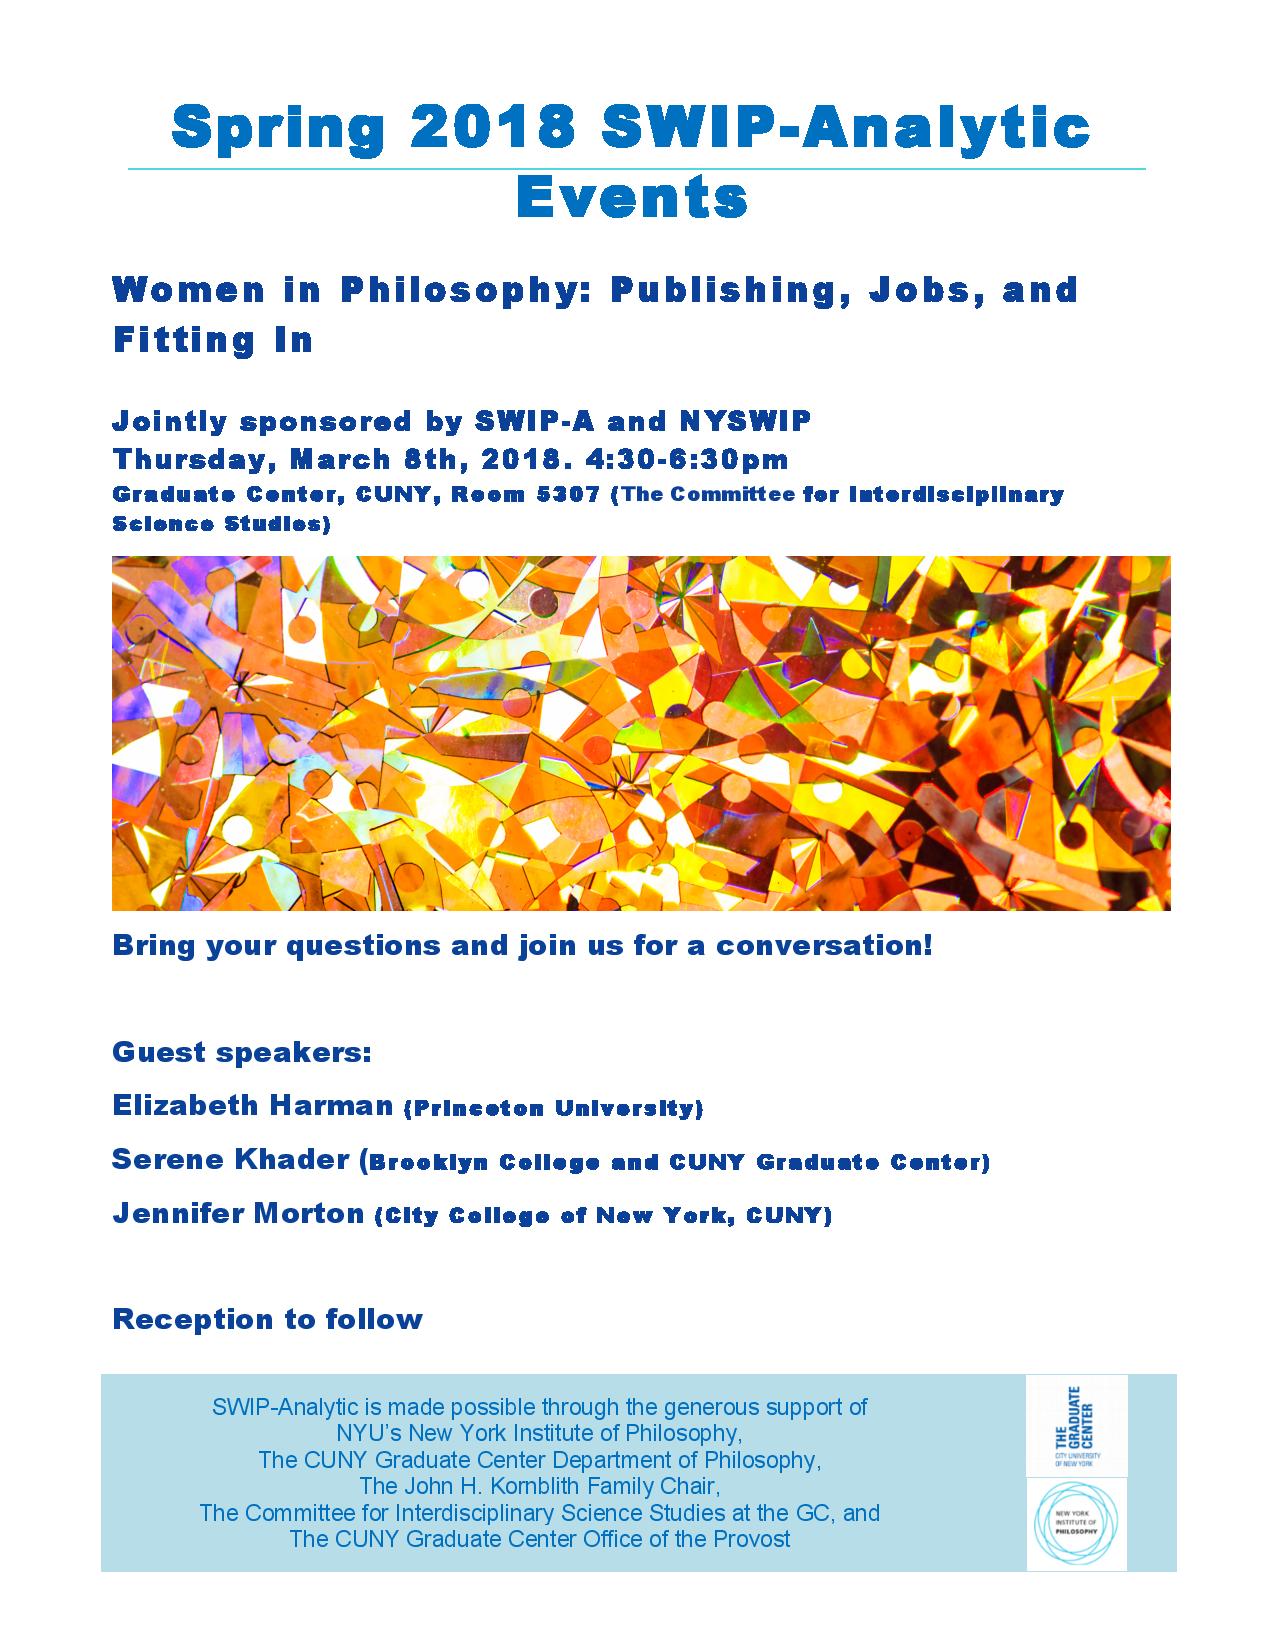 2017-2018 Events - SWIP-Analytic, Society for Women in Philosophy